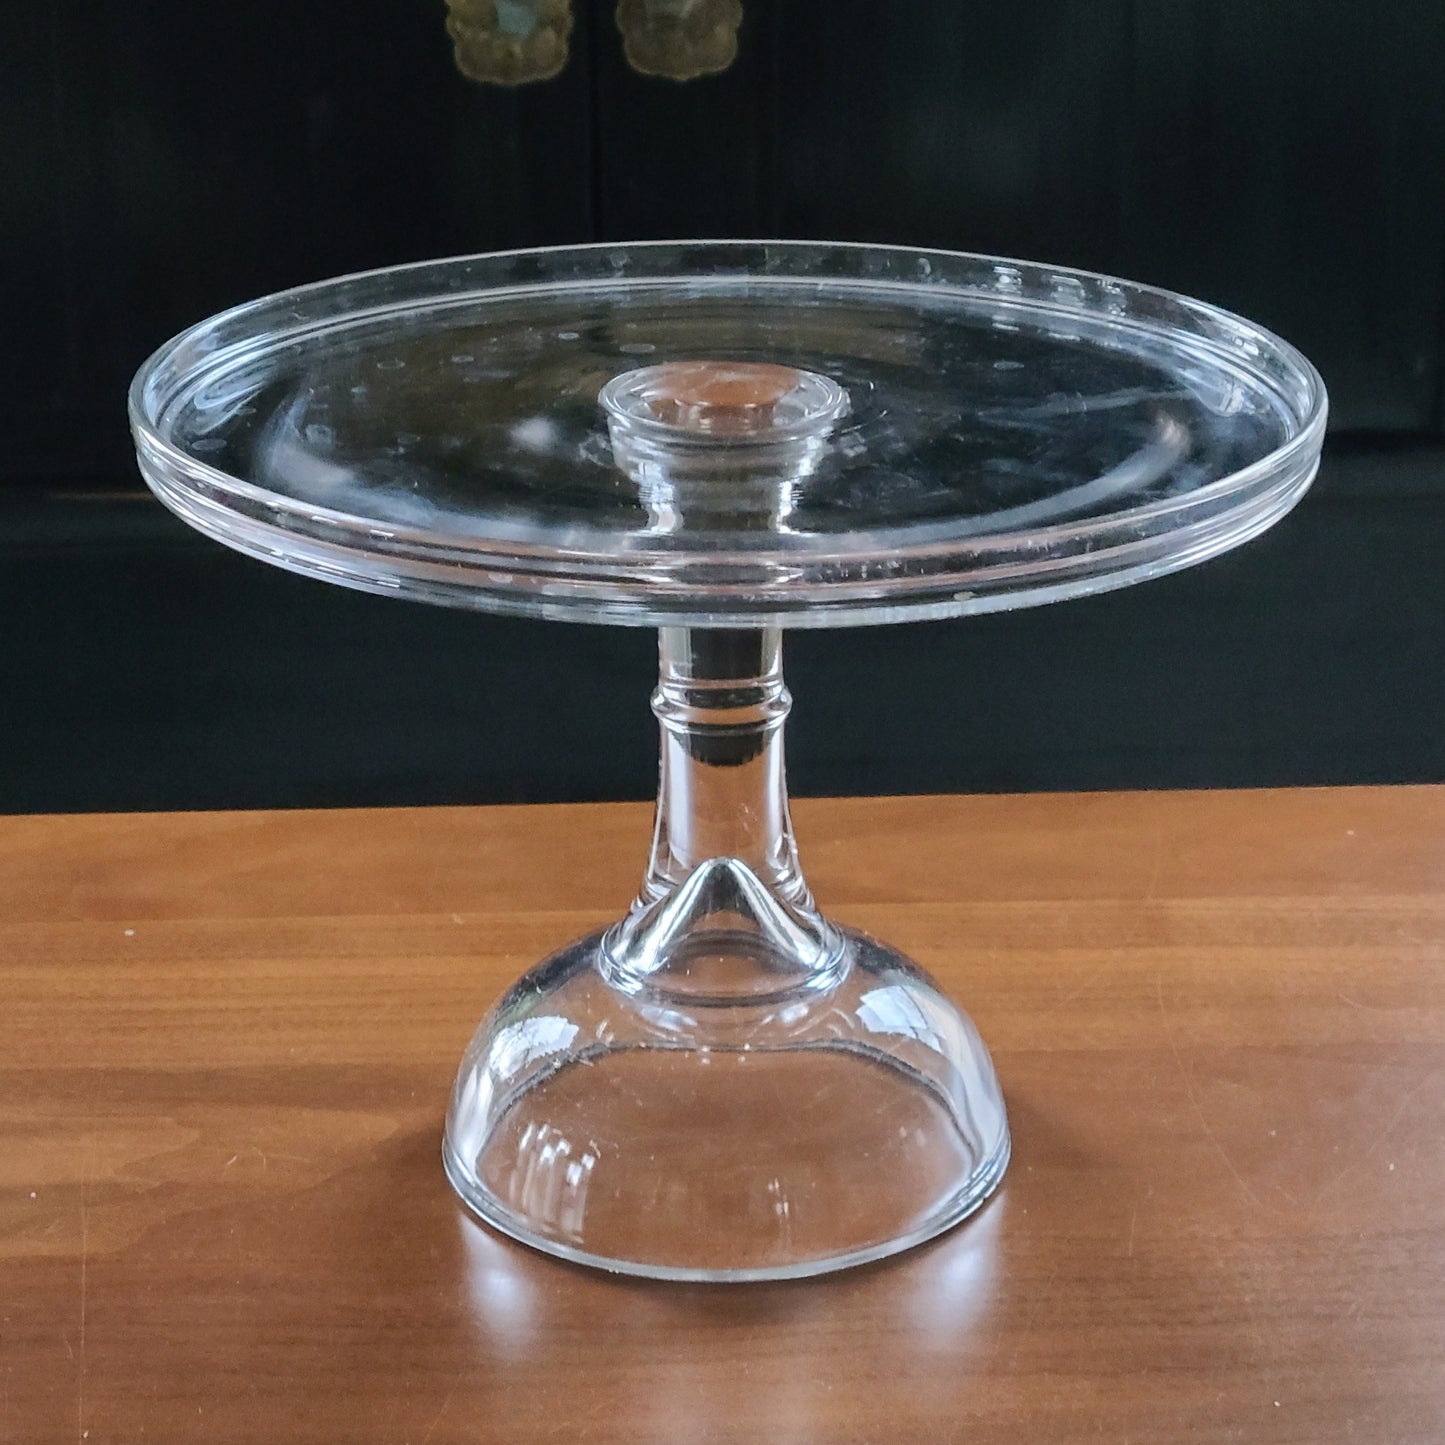 Phryne Early American Cake stand